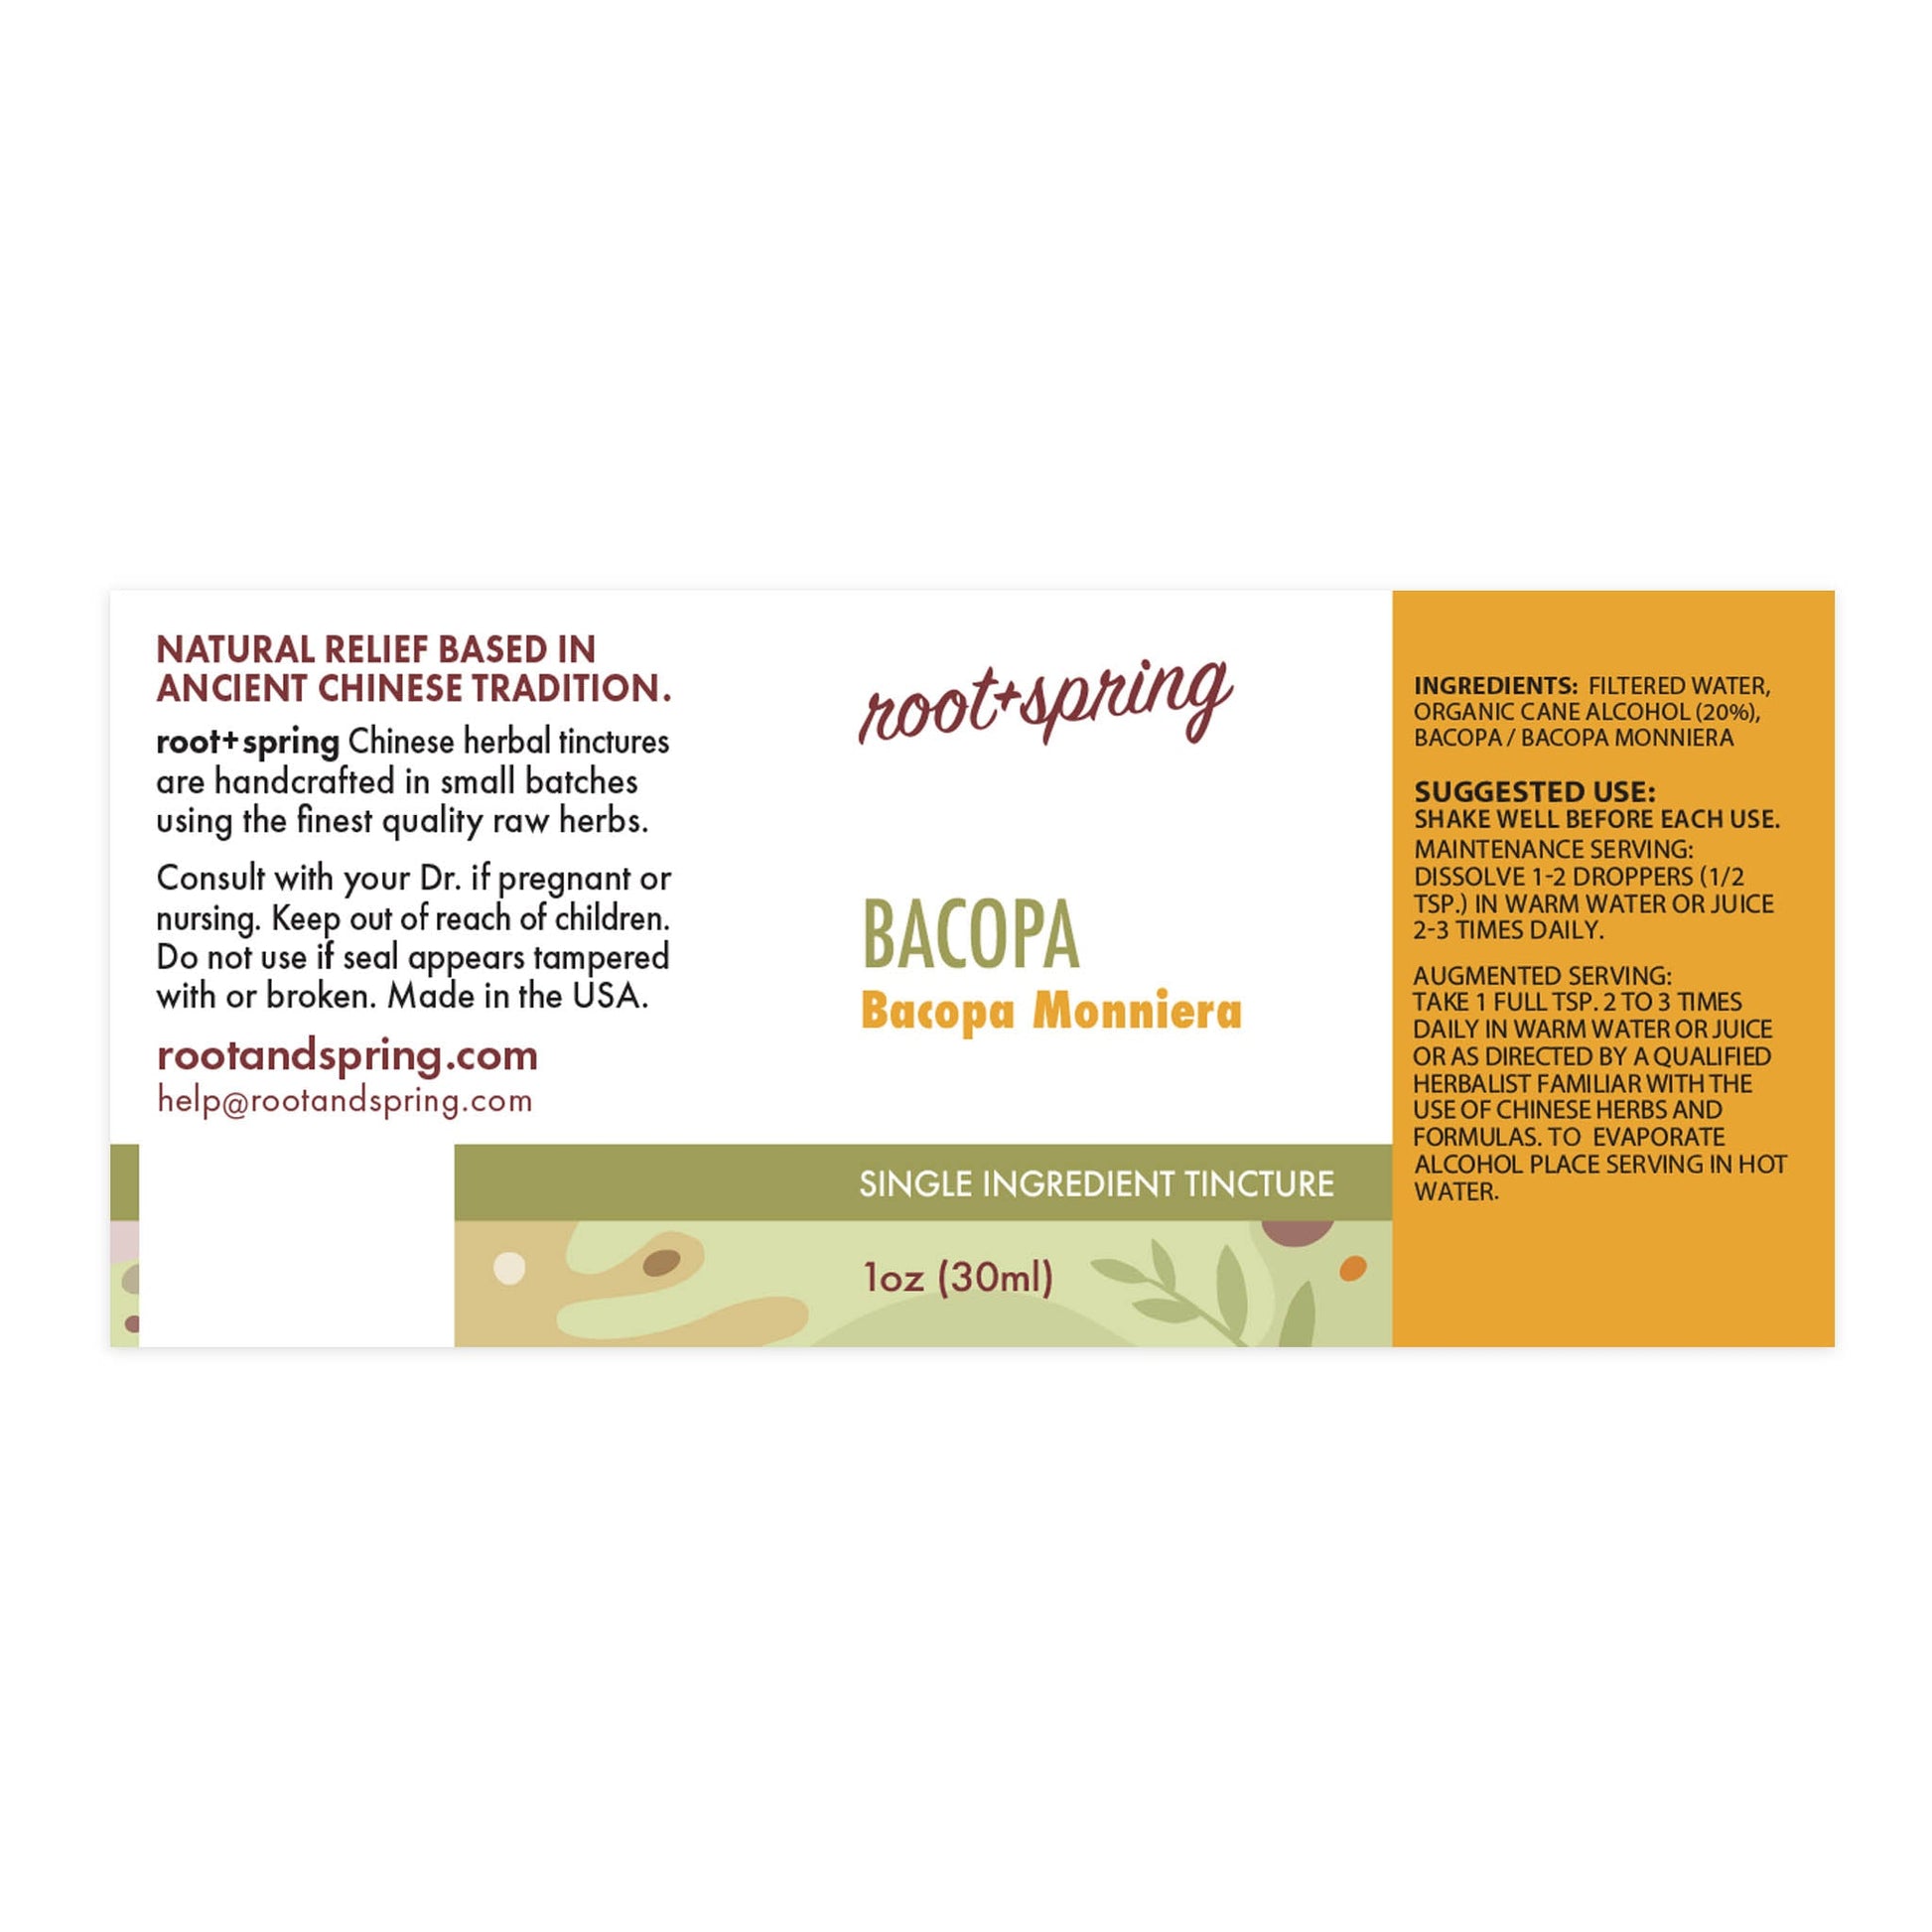 Label of Bacopa (Bacopa Monniera) - Herbal Tincture by root + spring